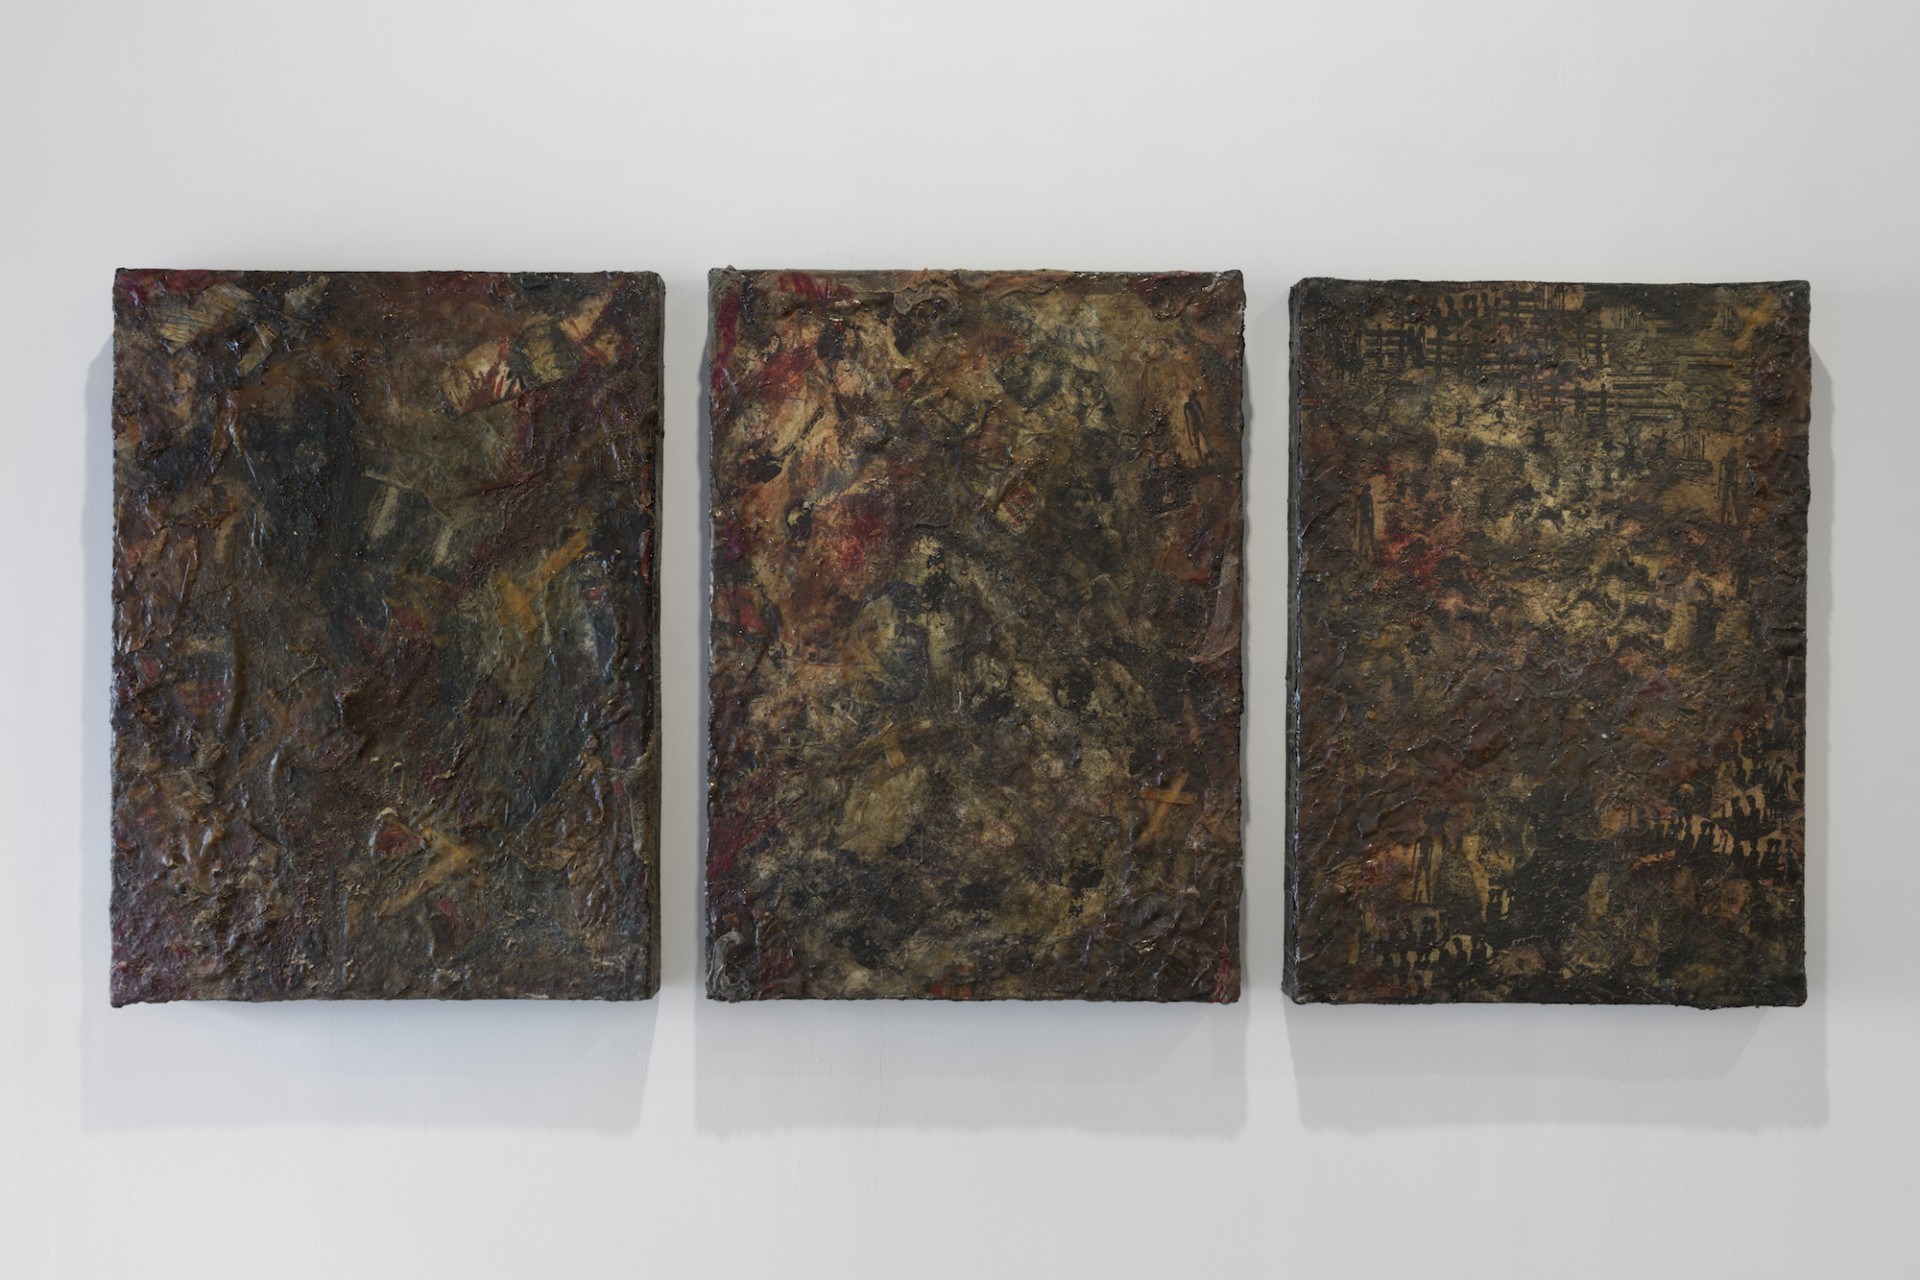 Luther Price, *Panel Piece Two, (Three Panels)*, 1983-84. Mixed media